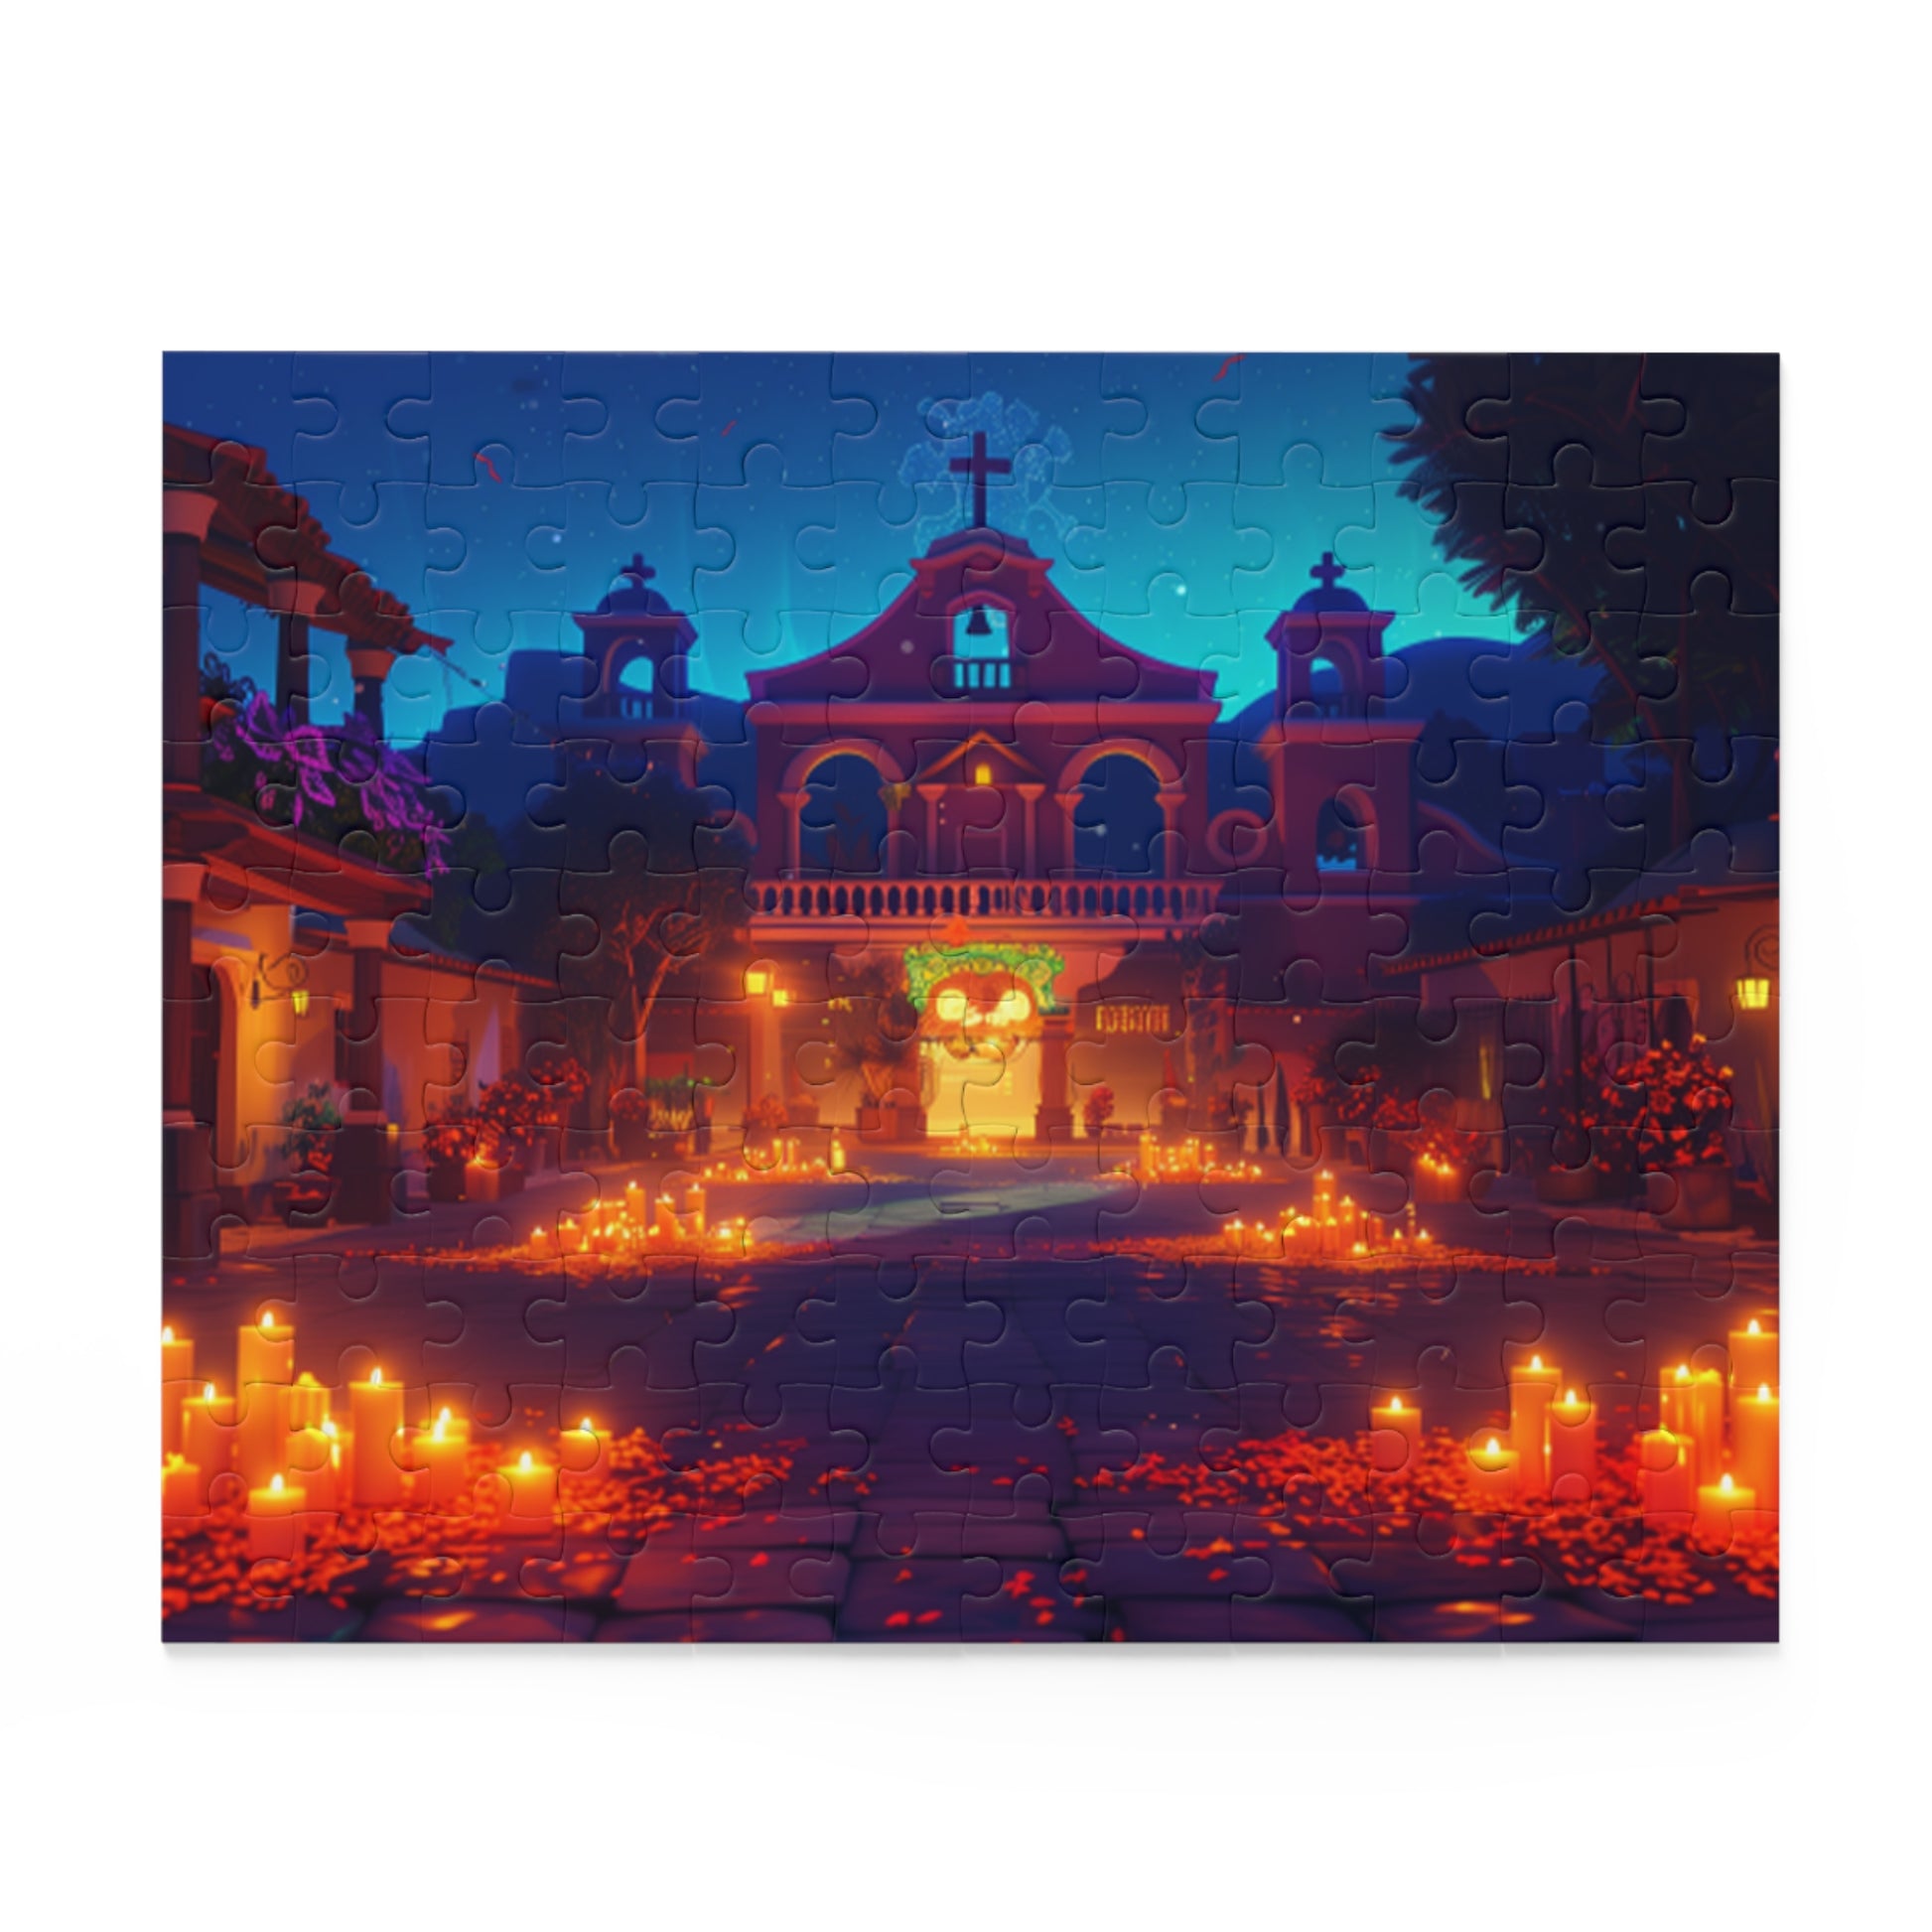 Mexican Art Church Candle Night Retro Jigsaw Puzzle Adult Birthday Business Jigsaw Puzzle Gift for Him Funny Humorous Indoor Outdoor Game Gift For Her Online-2